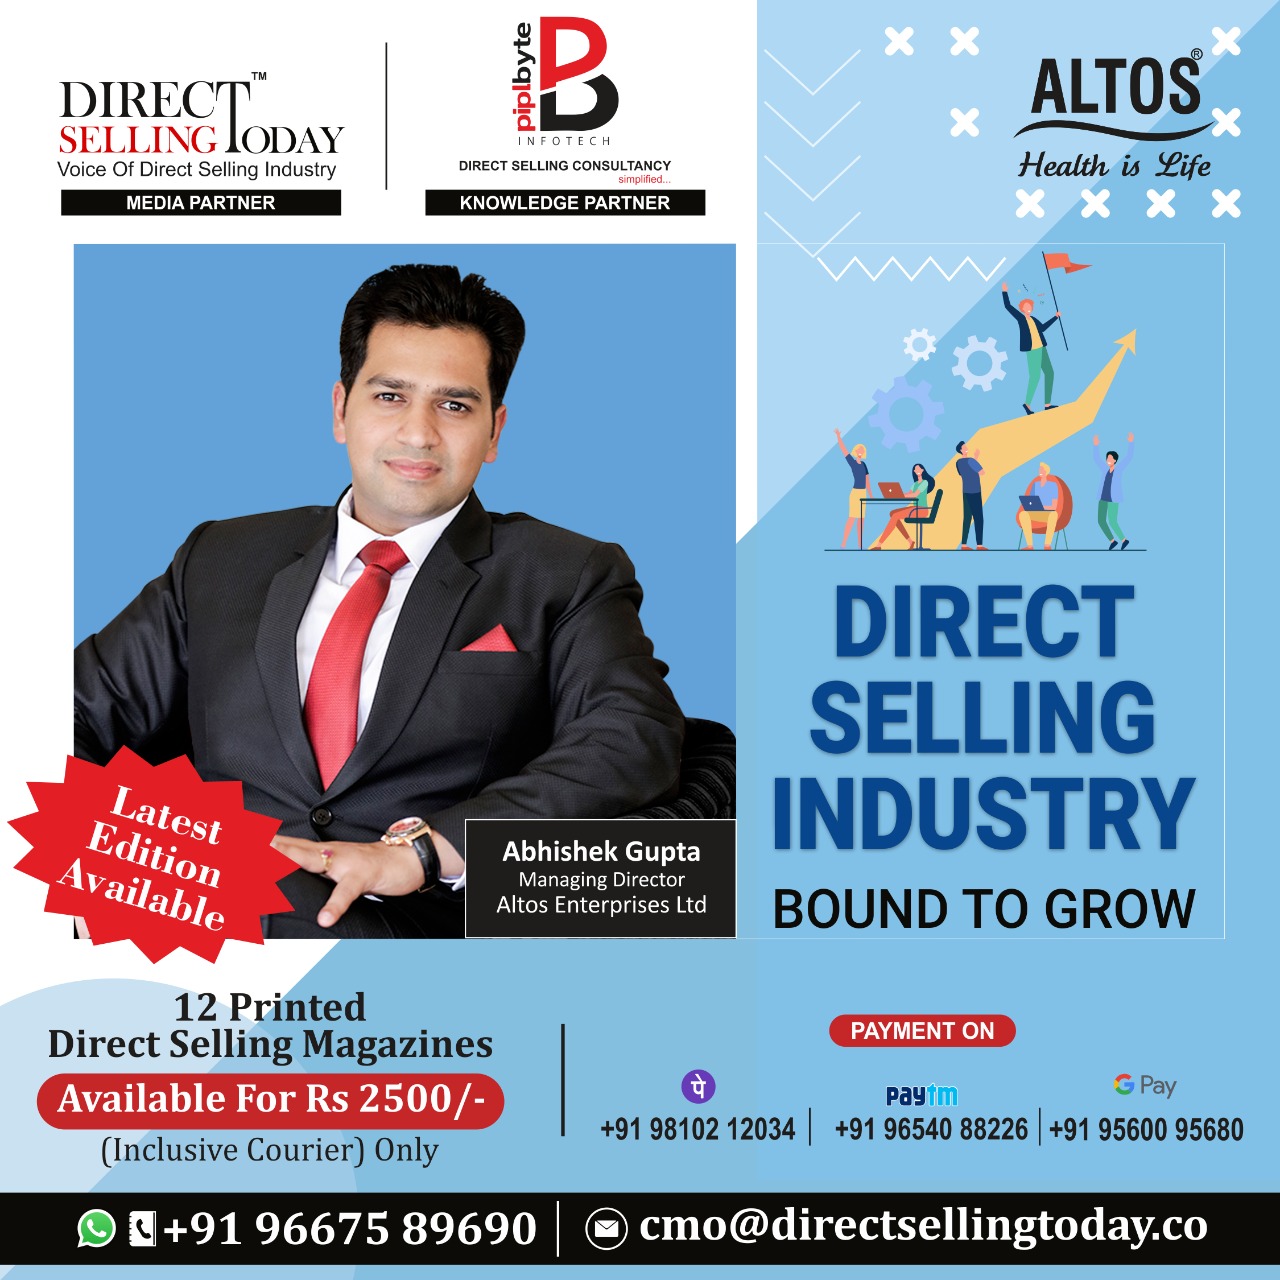 DIRECT SELLING INDUSTRY BOUND TO GROW